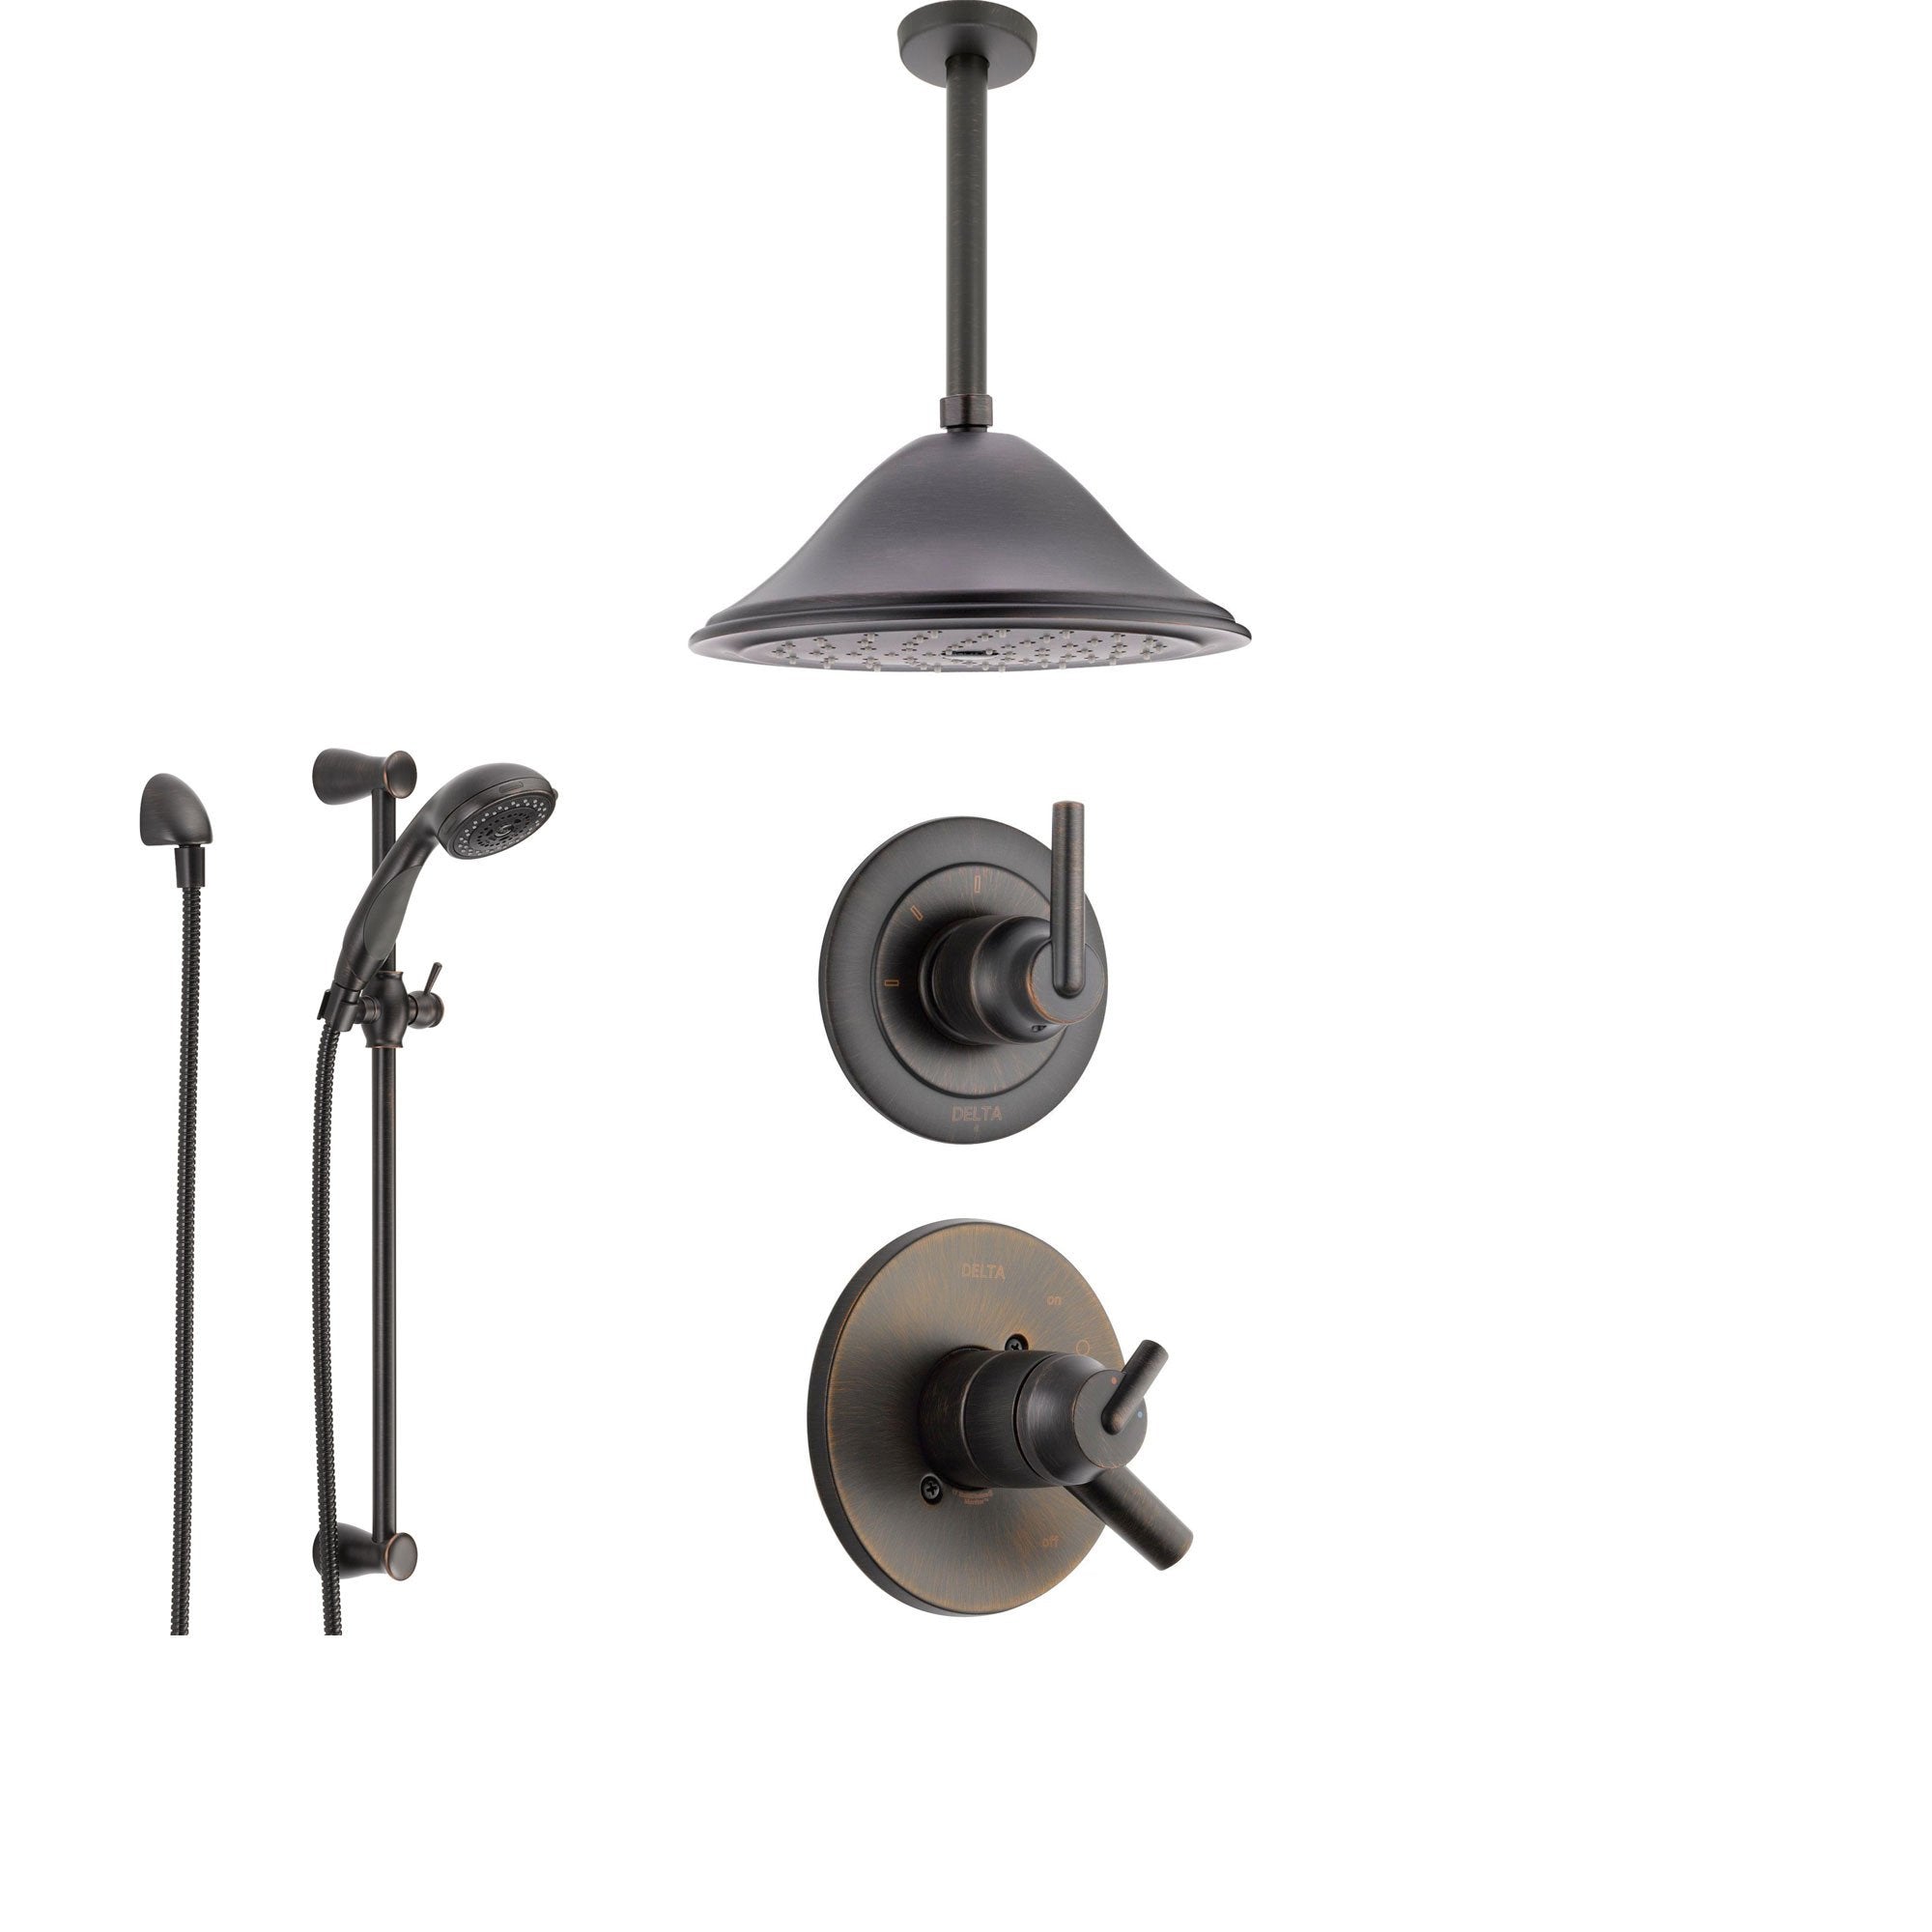 Delta Trinsic Venetian Bronze Shower System with Dual Control Shower Handle, 3-setting Diverter, Large Ceiling Mount Rain Showerhead, and Handheld Shower SS175982RB